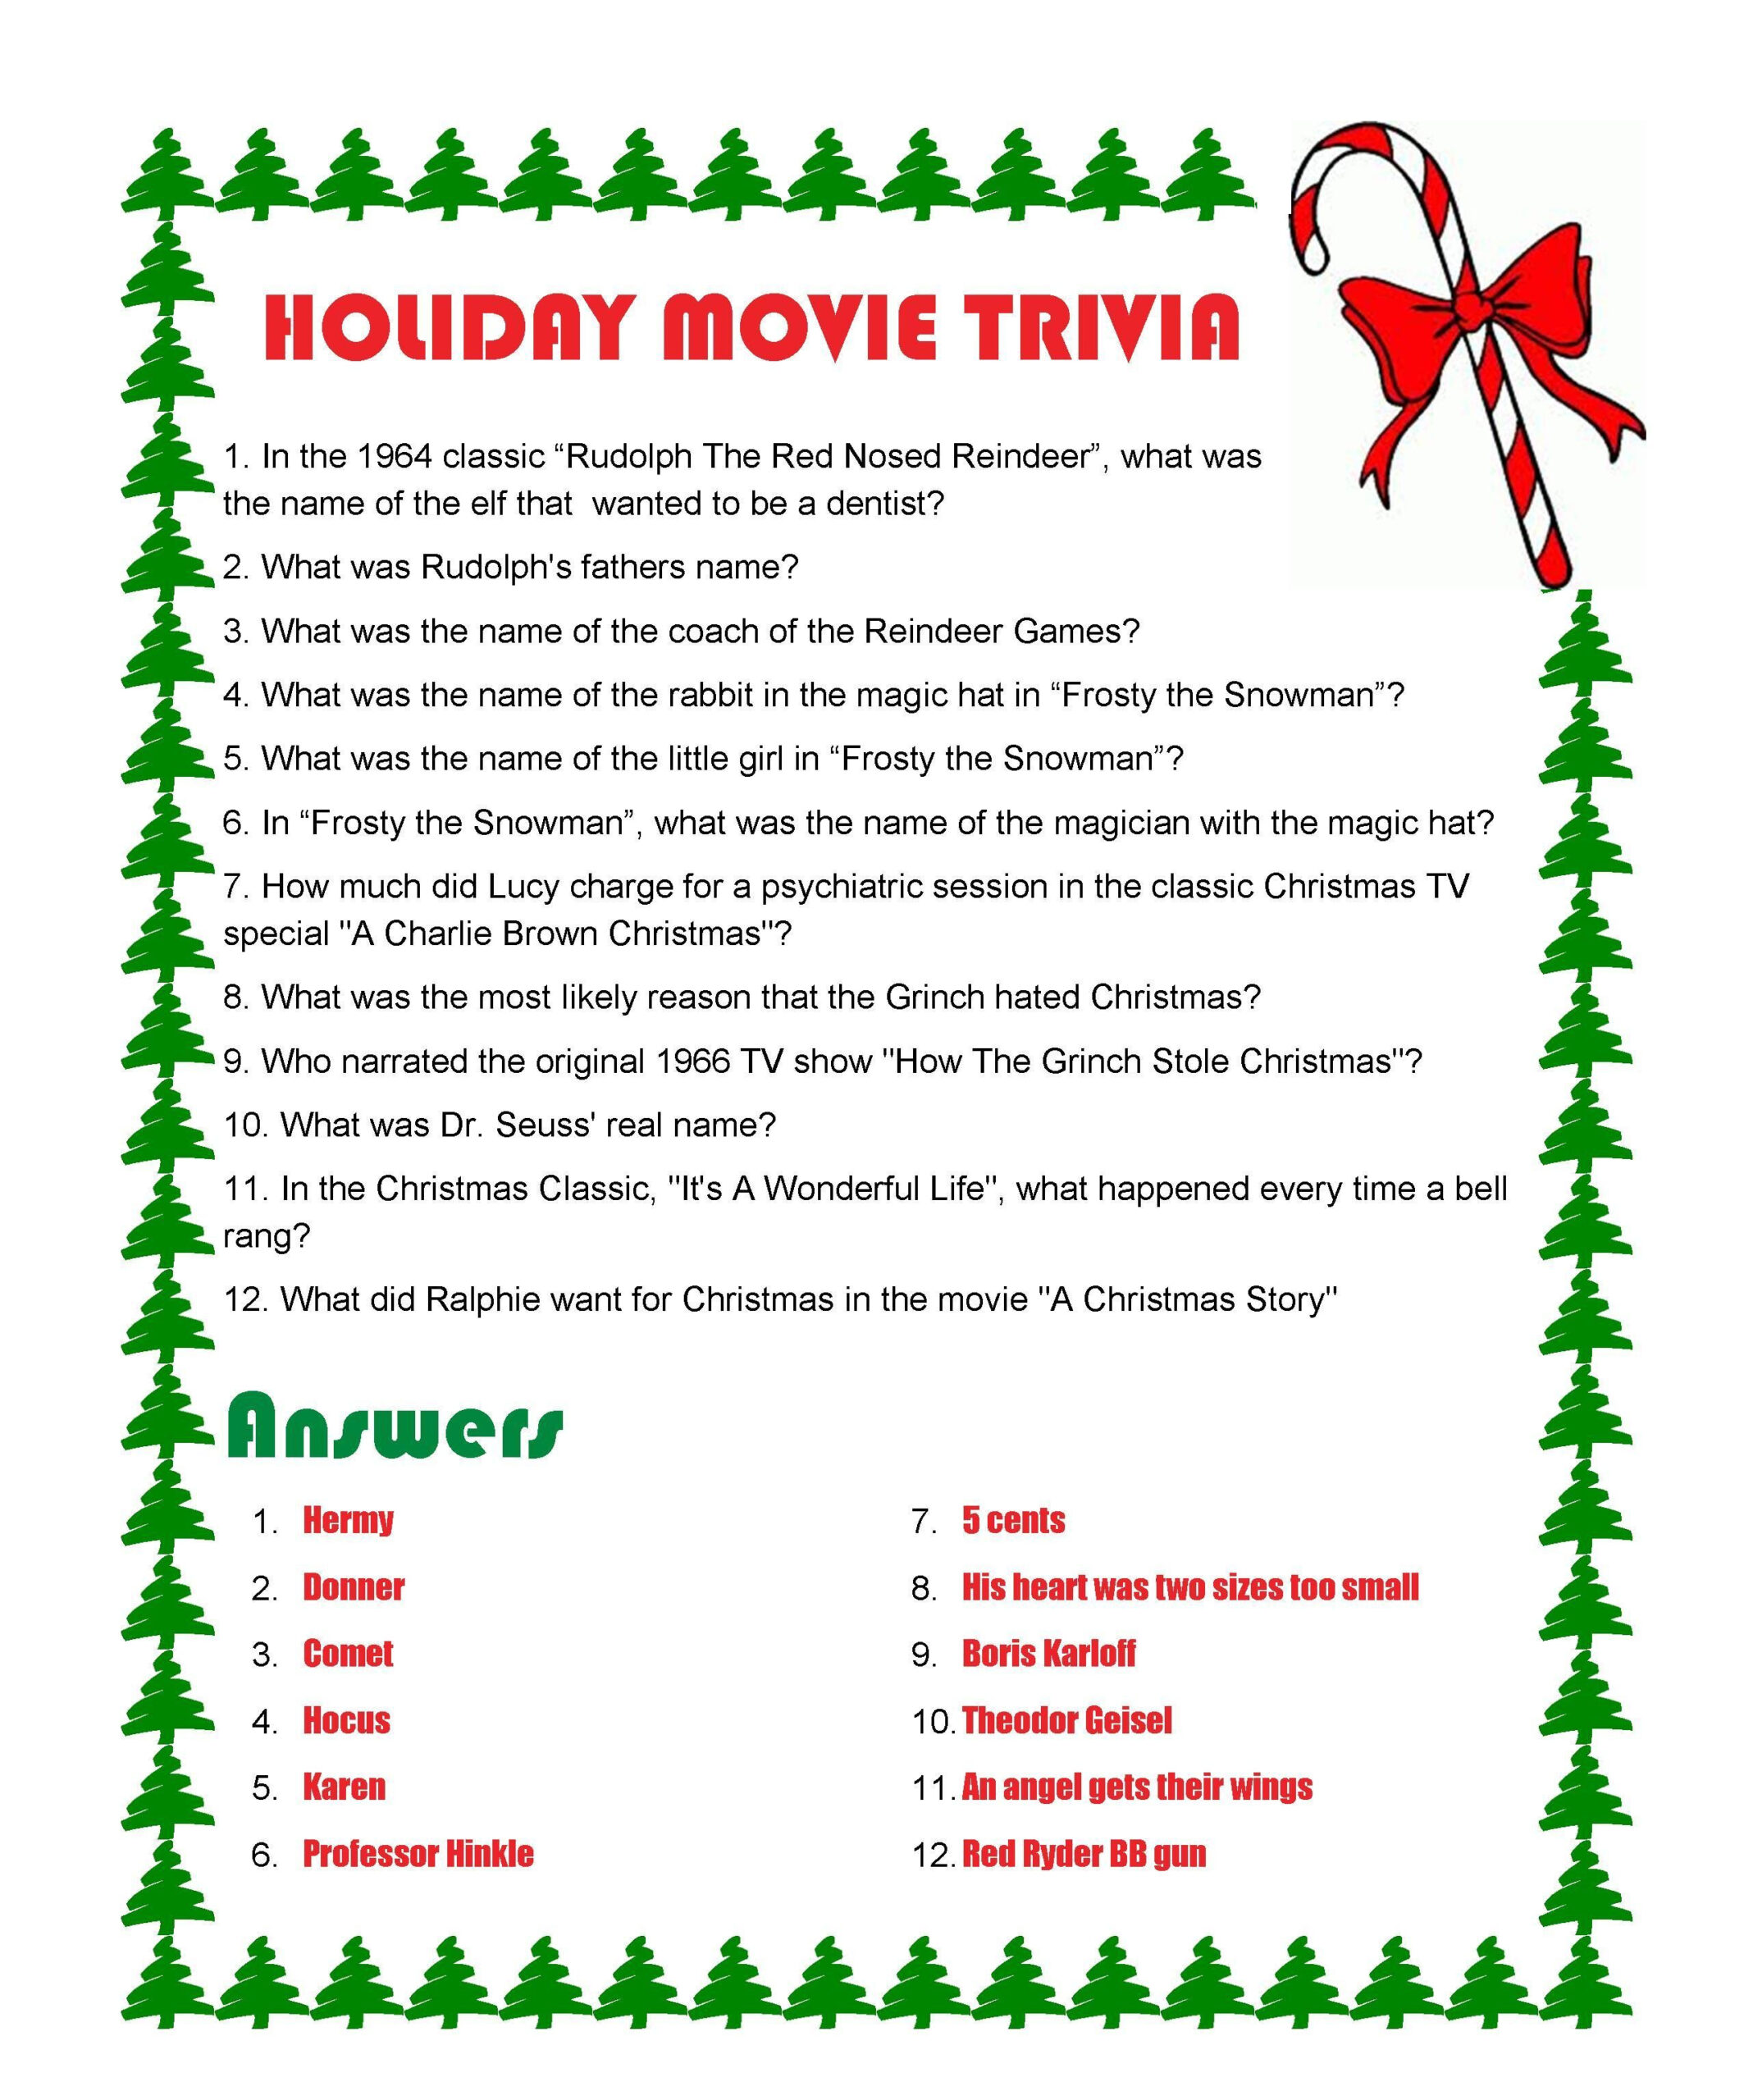 Fun Christmas Trivia Questions And Answers